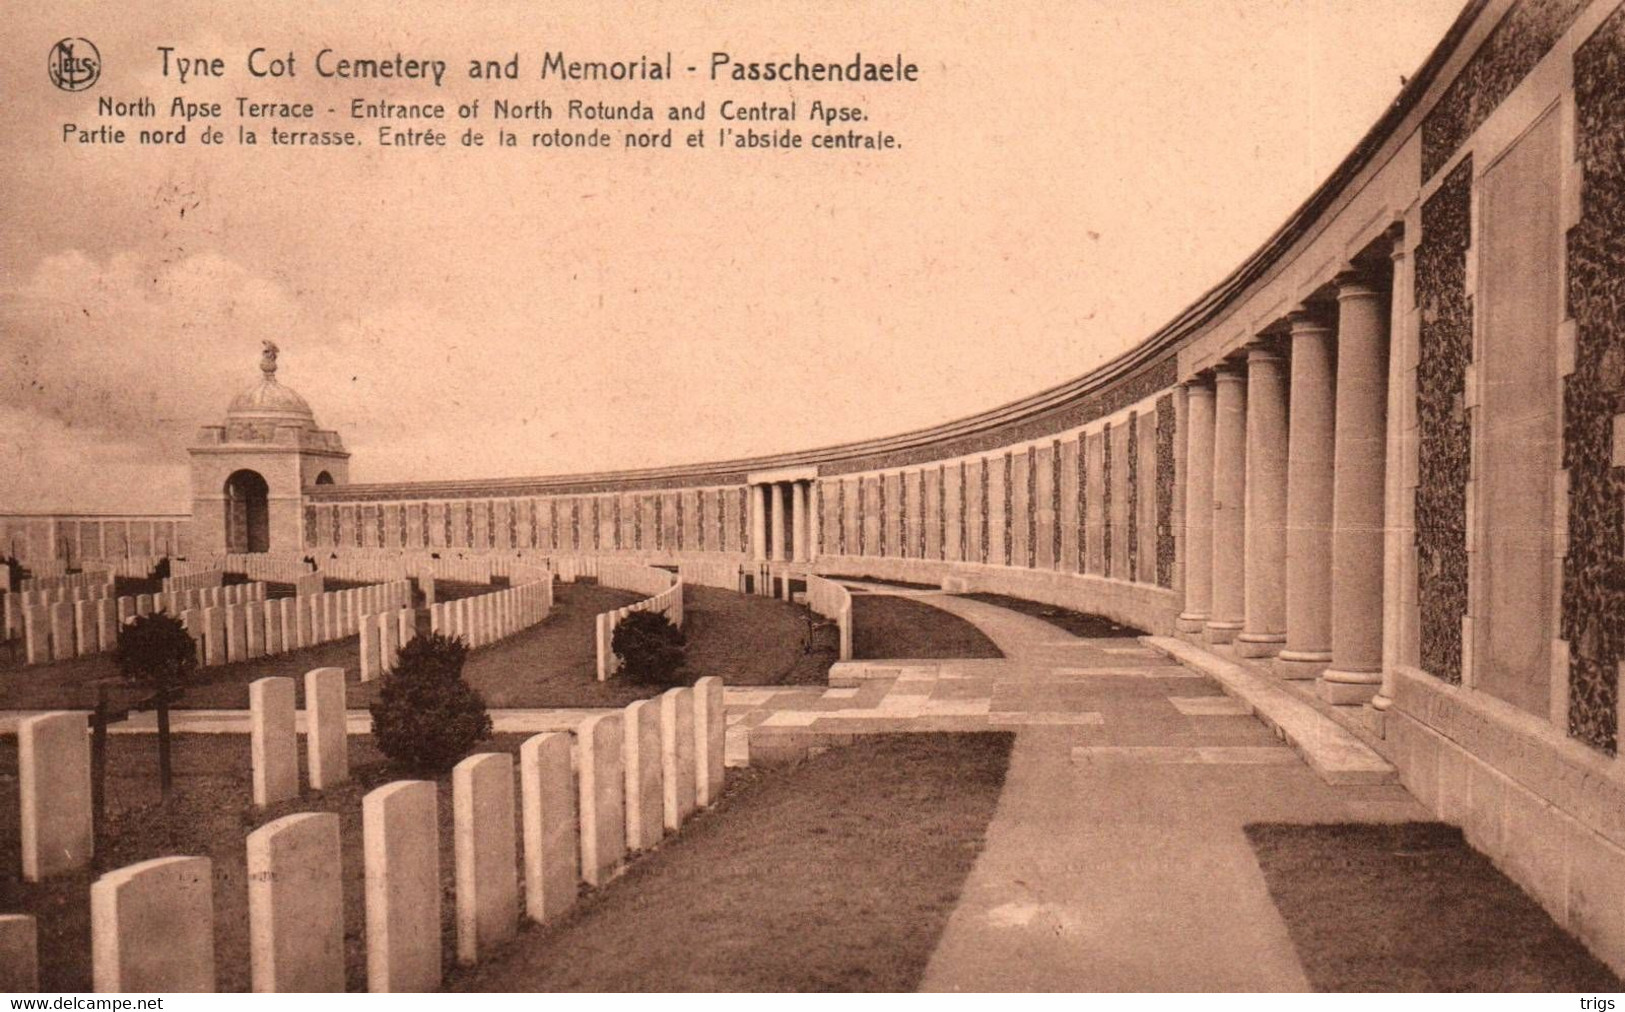 Passchendaele (Tyne Cot Cemetery And Memorial) - North Apse Terrace, Entrance Of North Rotunda And Central Apse - Zonnebeke